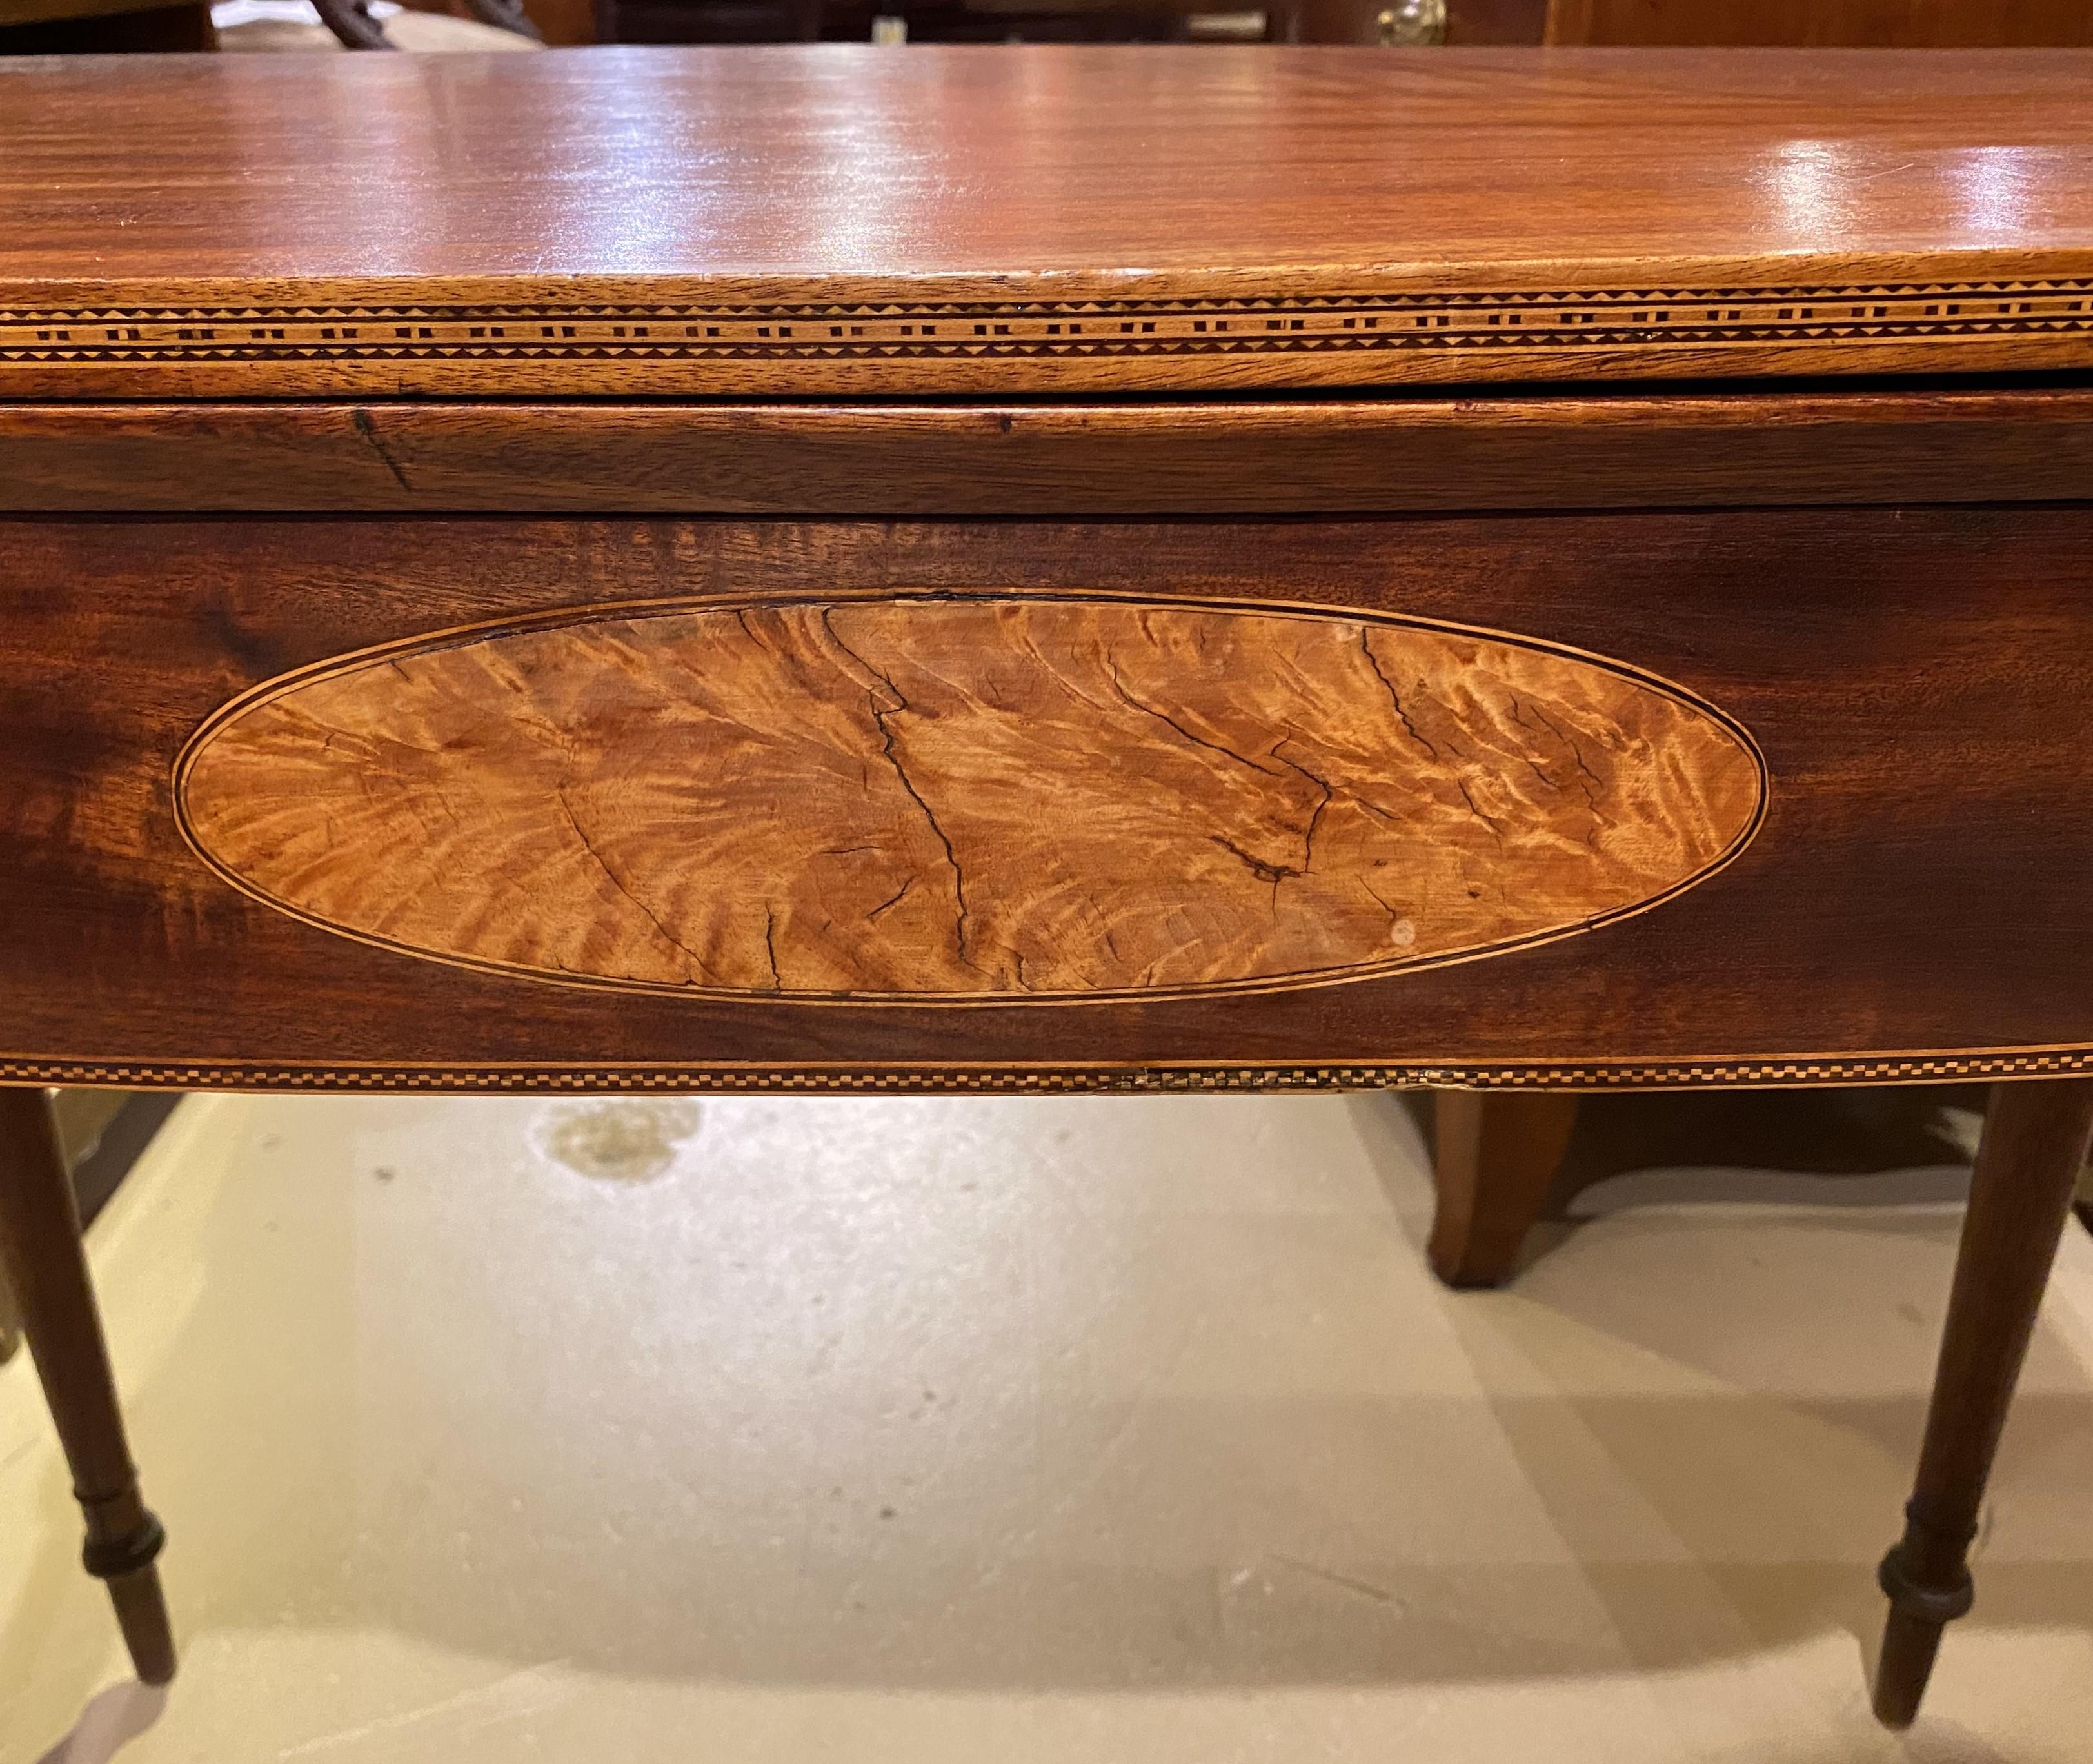 Fine Federal Period Sheraton Mahogany Card or Gaming Table circa 1800 In Good Condition For Sale In Milford, NH